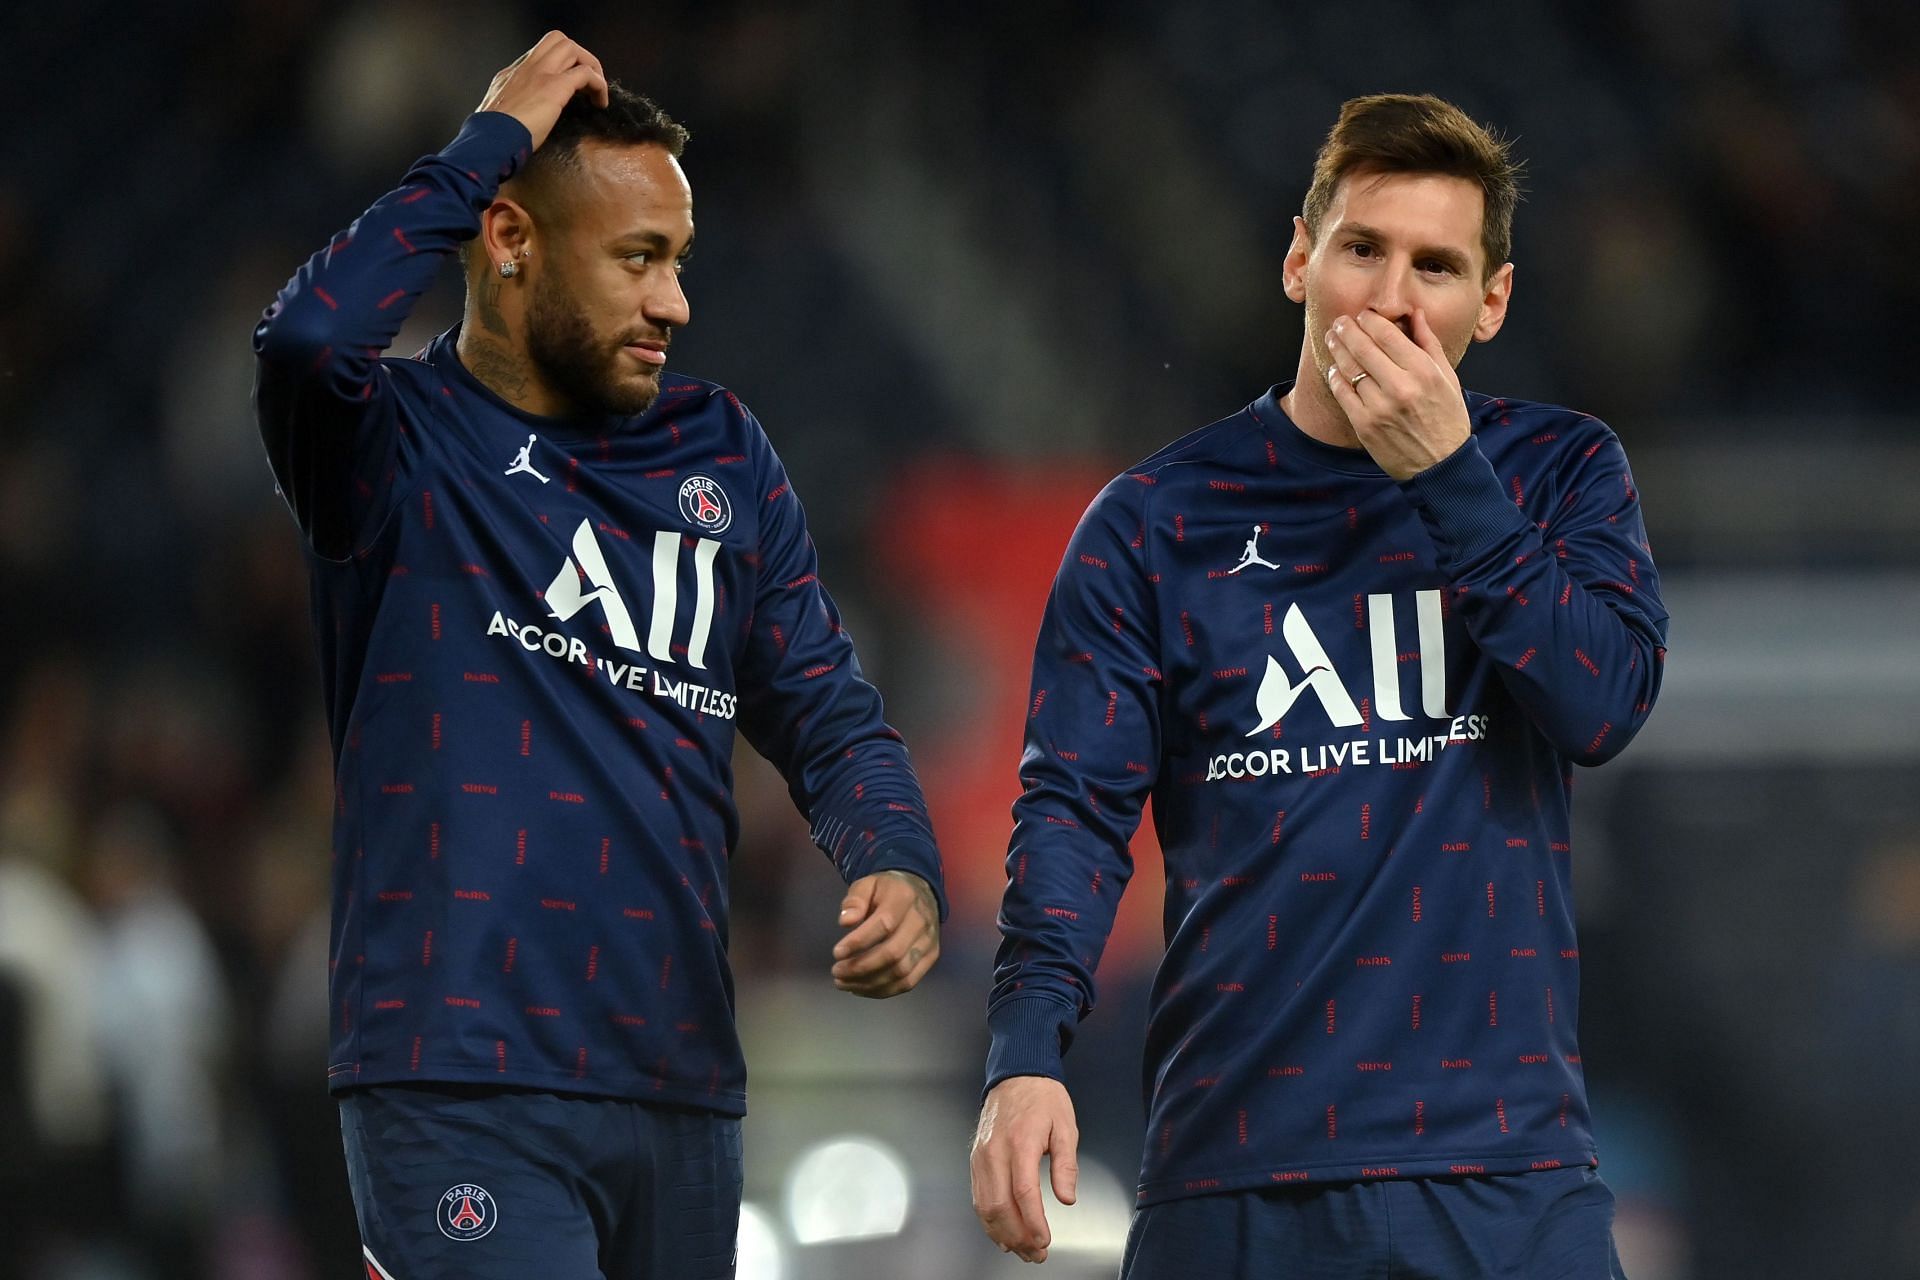 PSG superstars Lionel Messi and Neymar have been receiving strong reactions from the PSG supporters